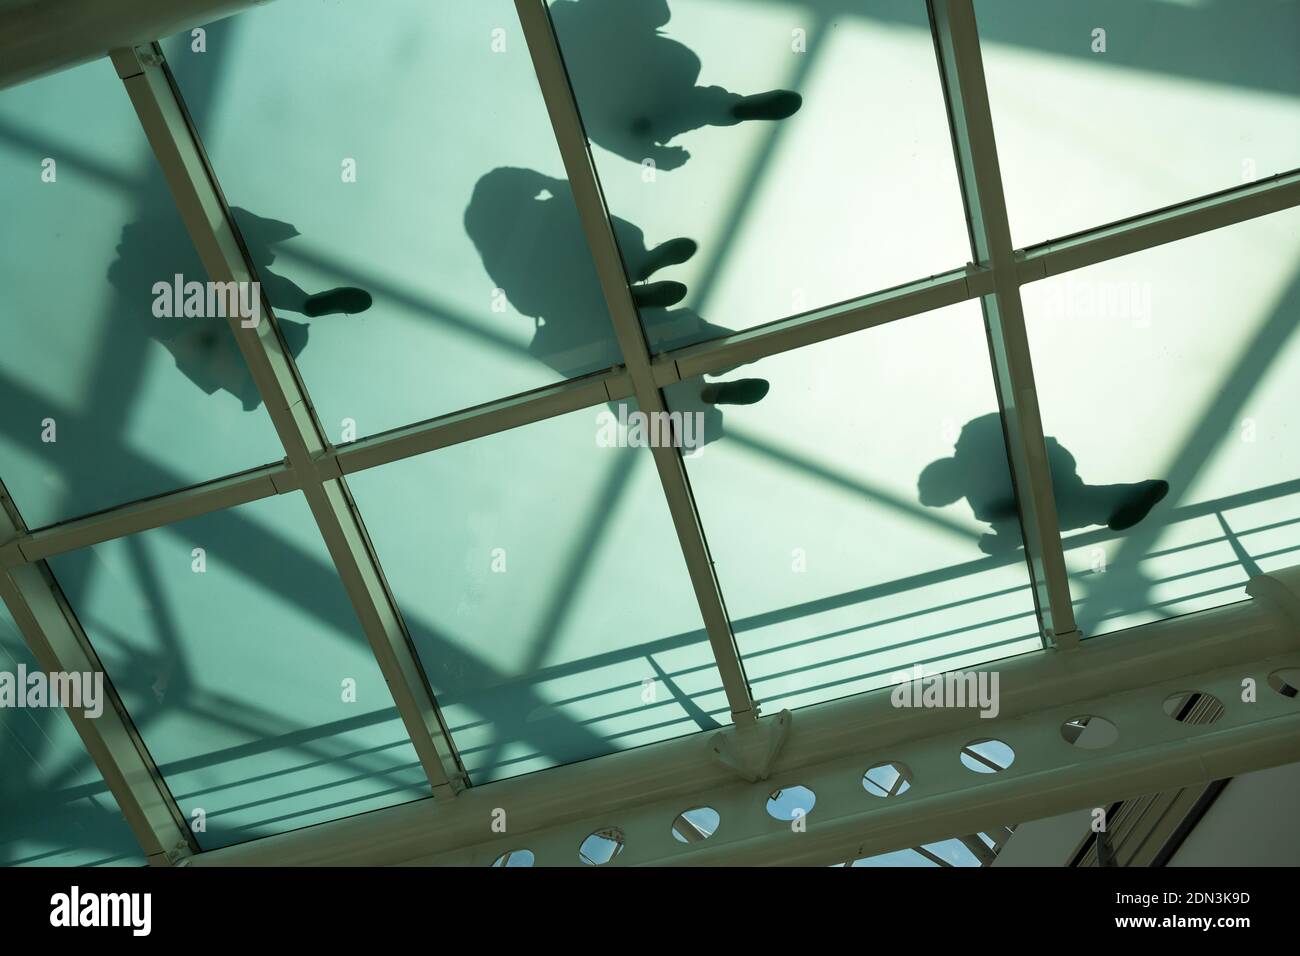 View from underneath at shadow of people walking on a glass bottom walkway in shopping mall, Lisbon, Portugal Stock Photo